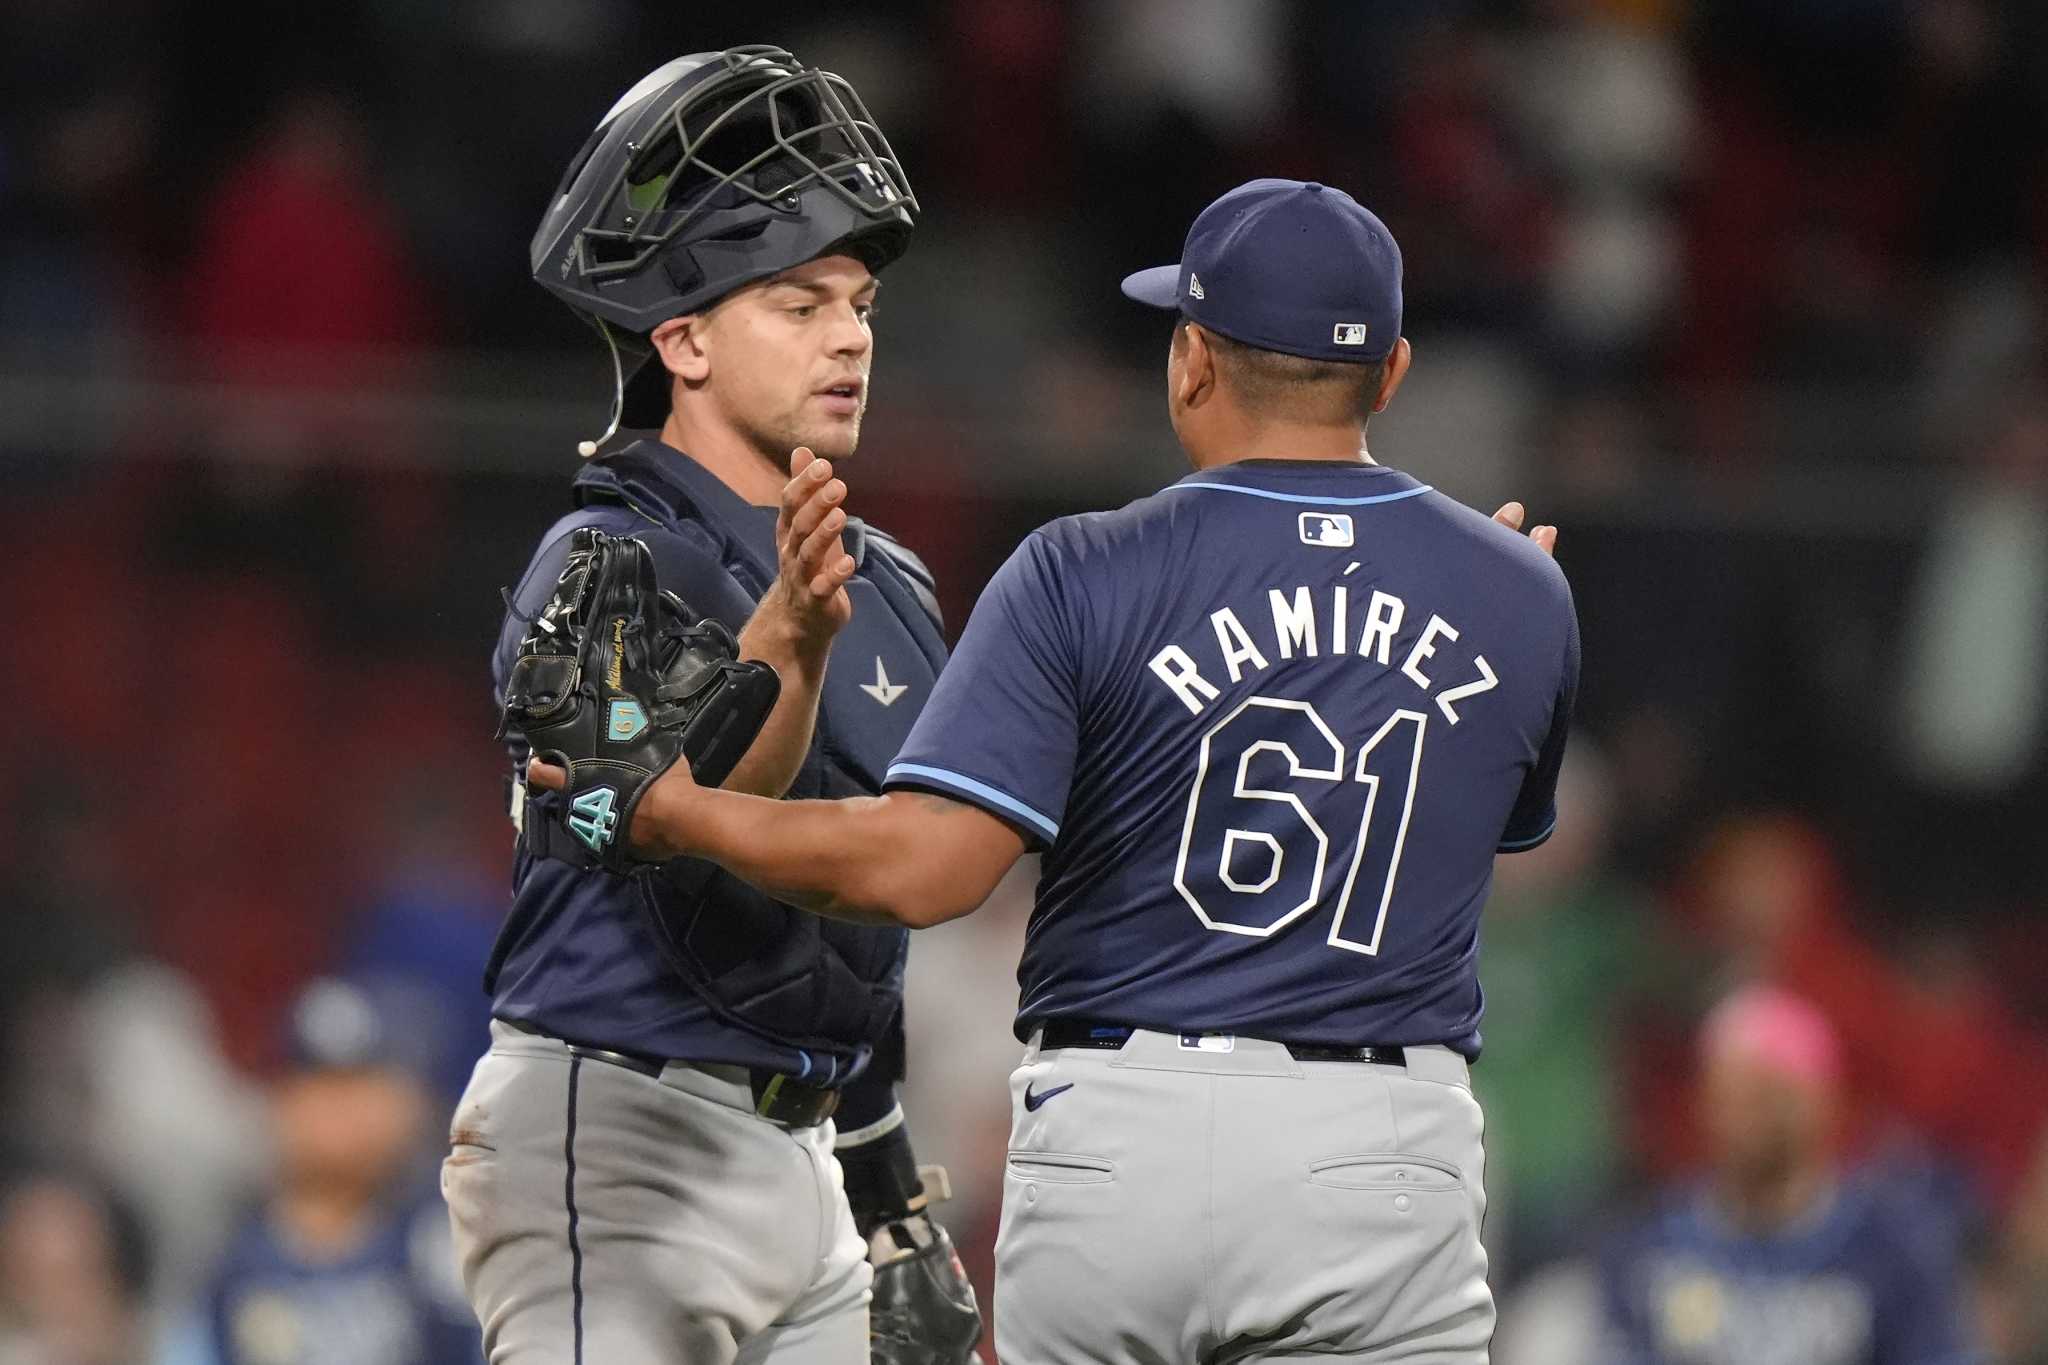 Rays forced to change pitchers in 9th after losing track of mound visits, beat Red Sox 7-5